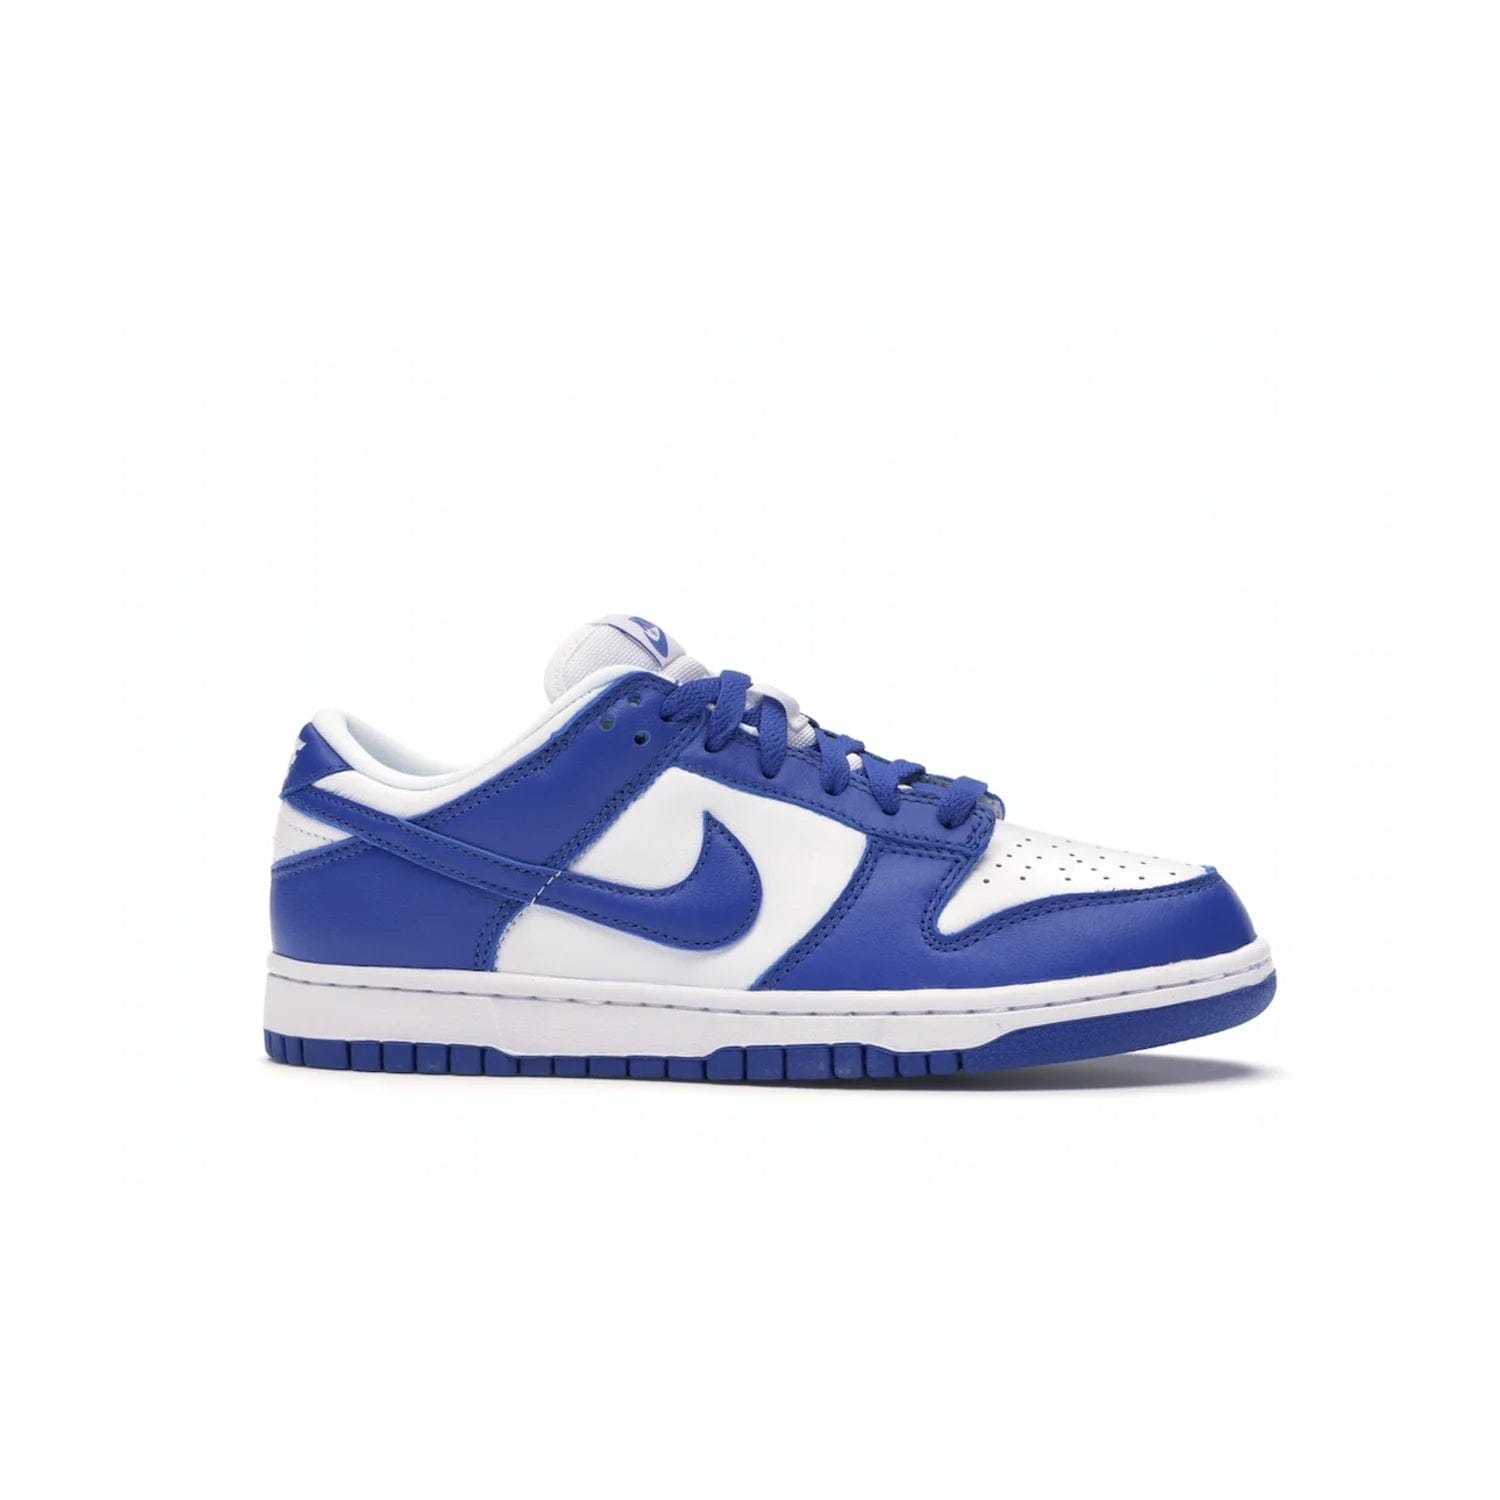 Nike Dunk Low SP Kentucky (2020/2022) - Image 2 - Only at www.BallersClubKickz.com - Classic Nike Dunk Low SP Kentucky with timeless White/Varsity Royal colorway. White leather upper, royal outsole, and Nike branding. A hit since March 2020 homage to the 1985 Nike College Colors program. Show your support with these classic kicks.